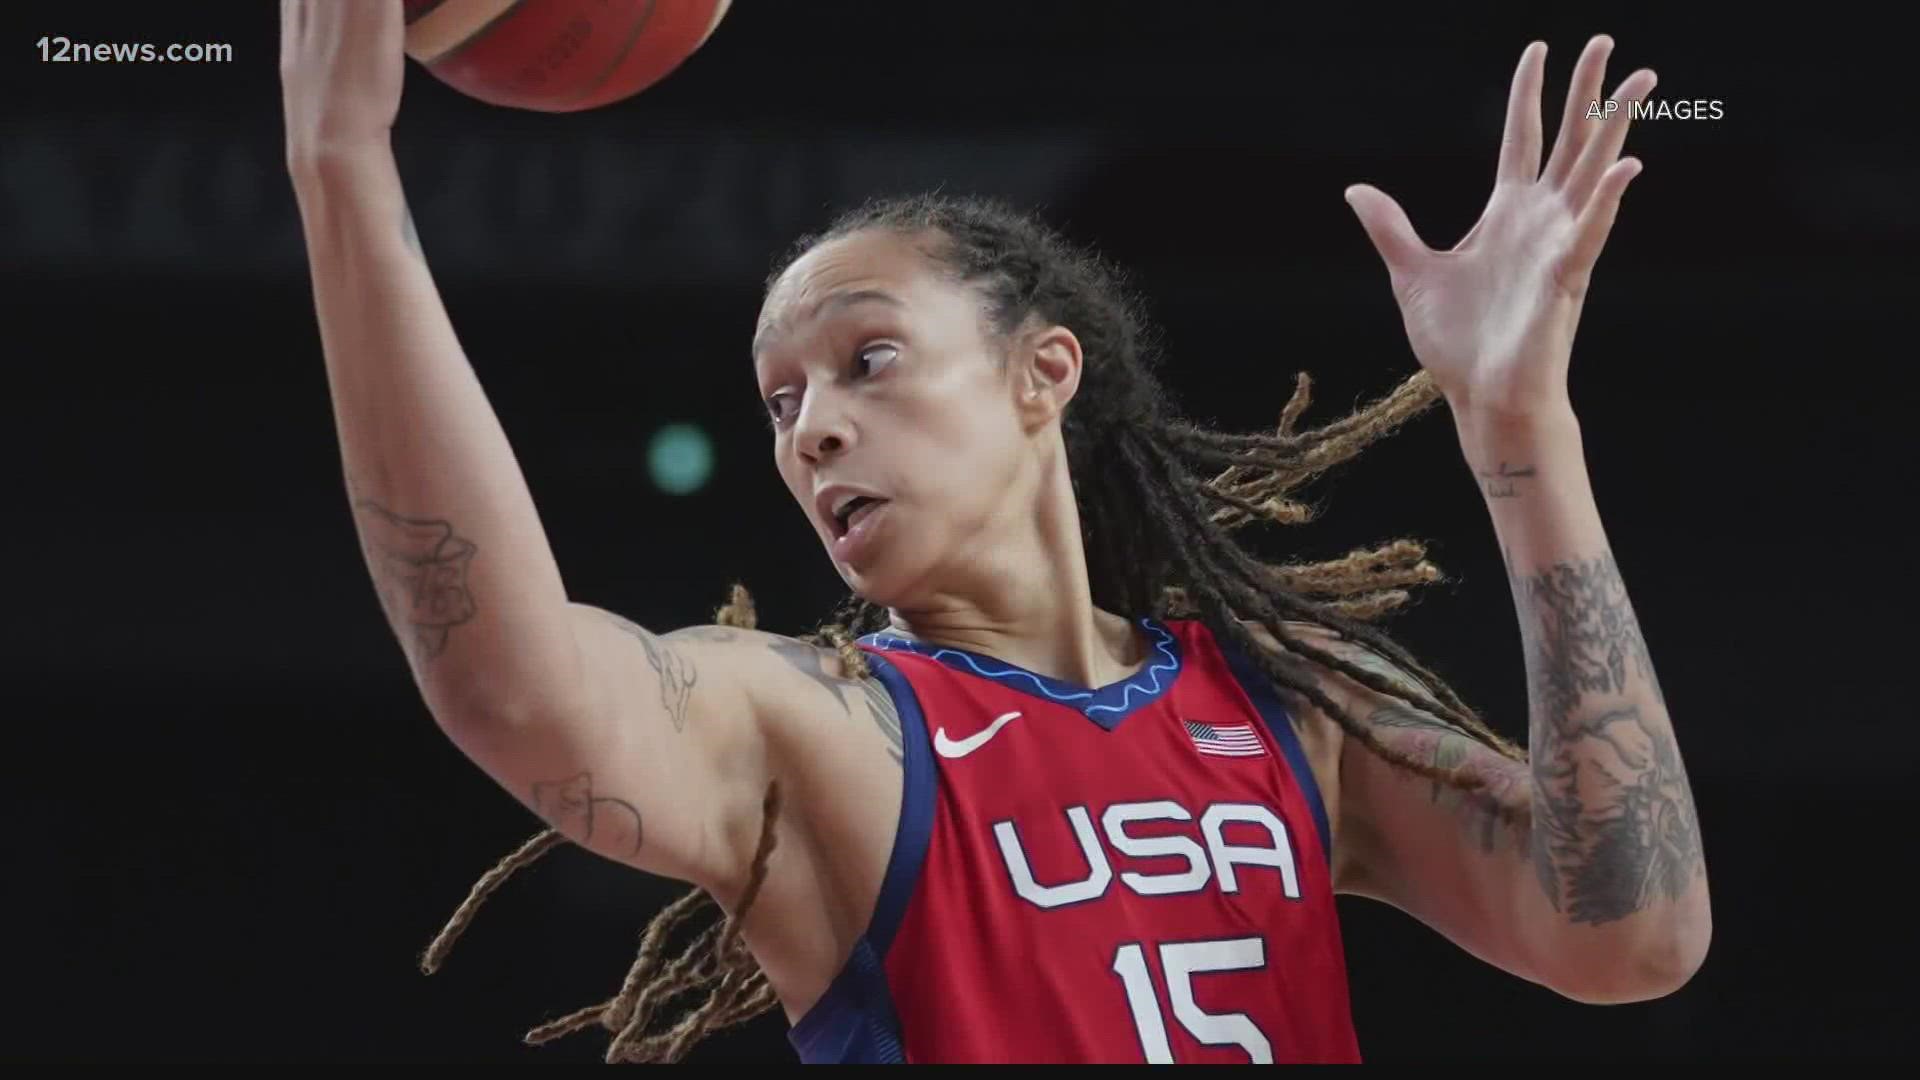 At the press conference, Blinken was asked the following questions by a New York Times reporter regarding Phoenix Mercury star Brittney Griner.